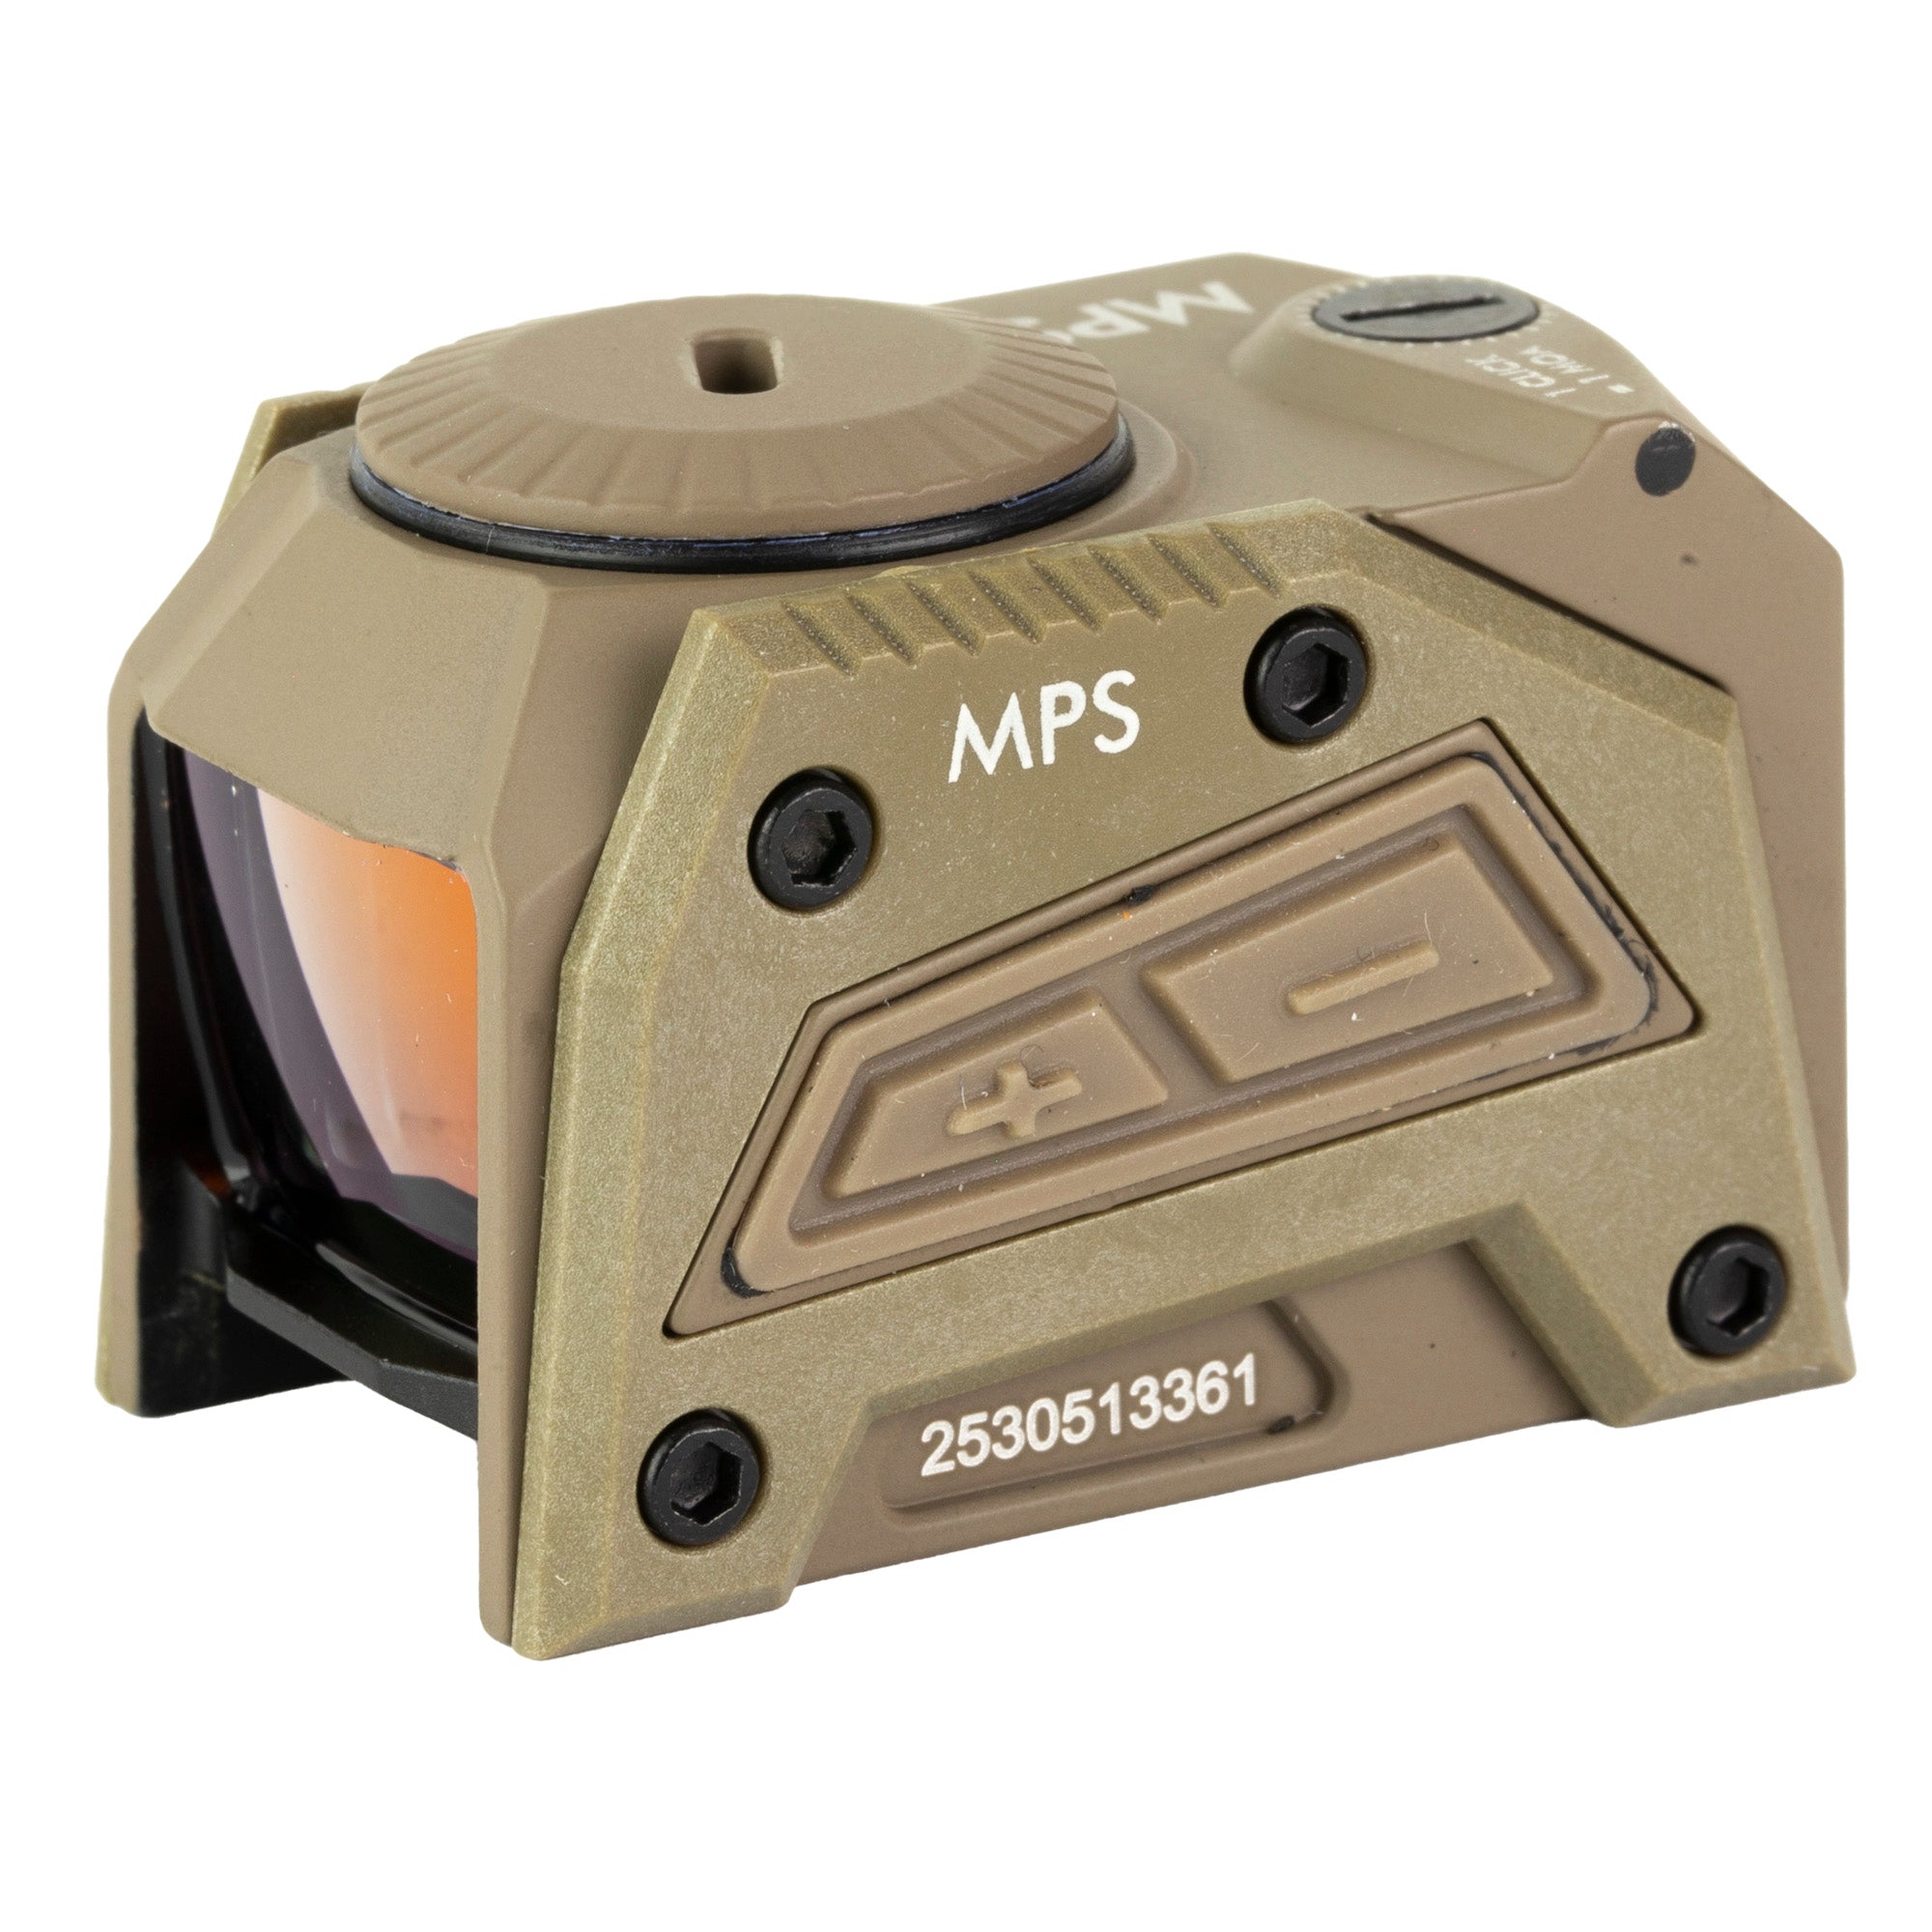 Steiner MPS 3 MOA Red Dot 3 MOA - ACRO Footprint - FDE Color